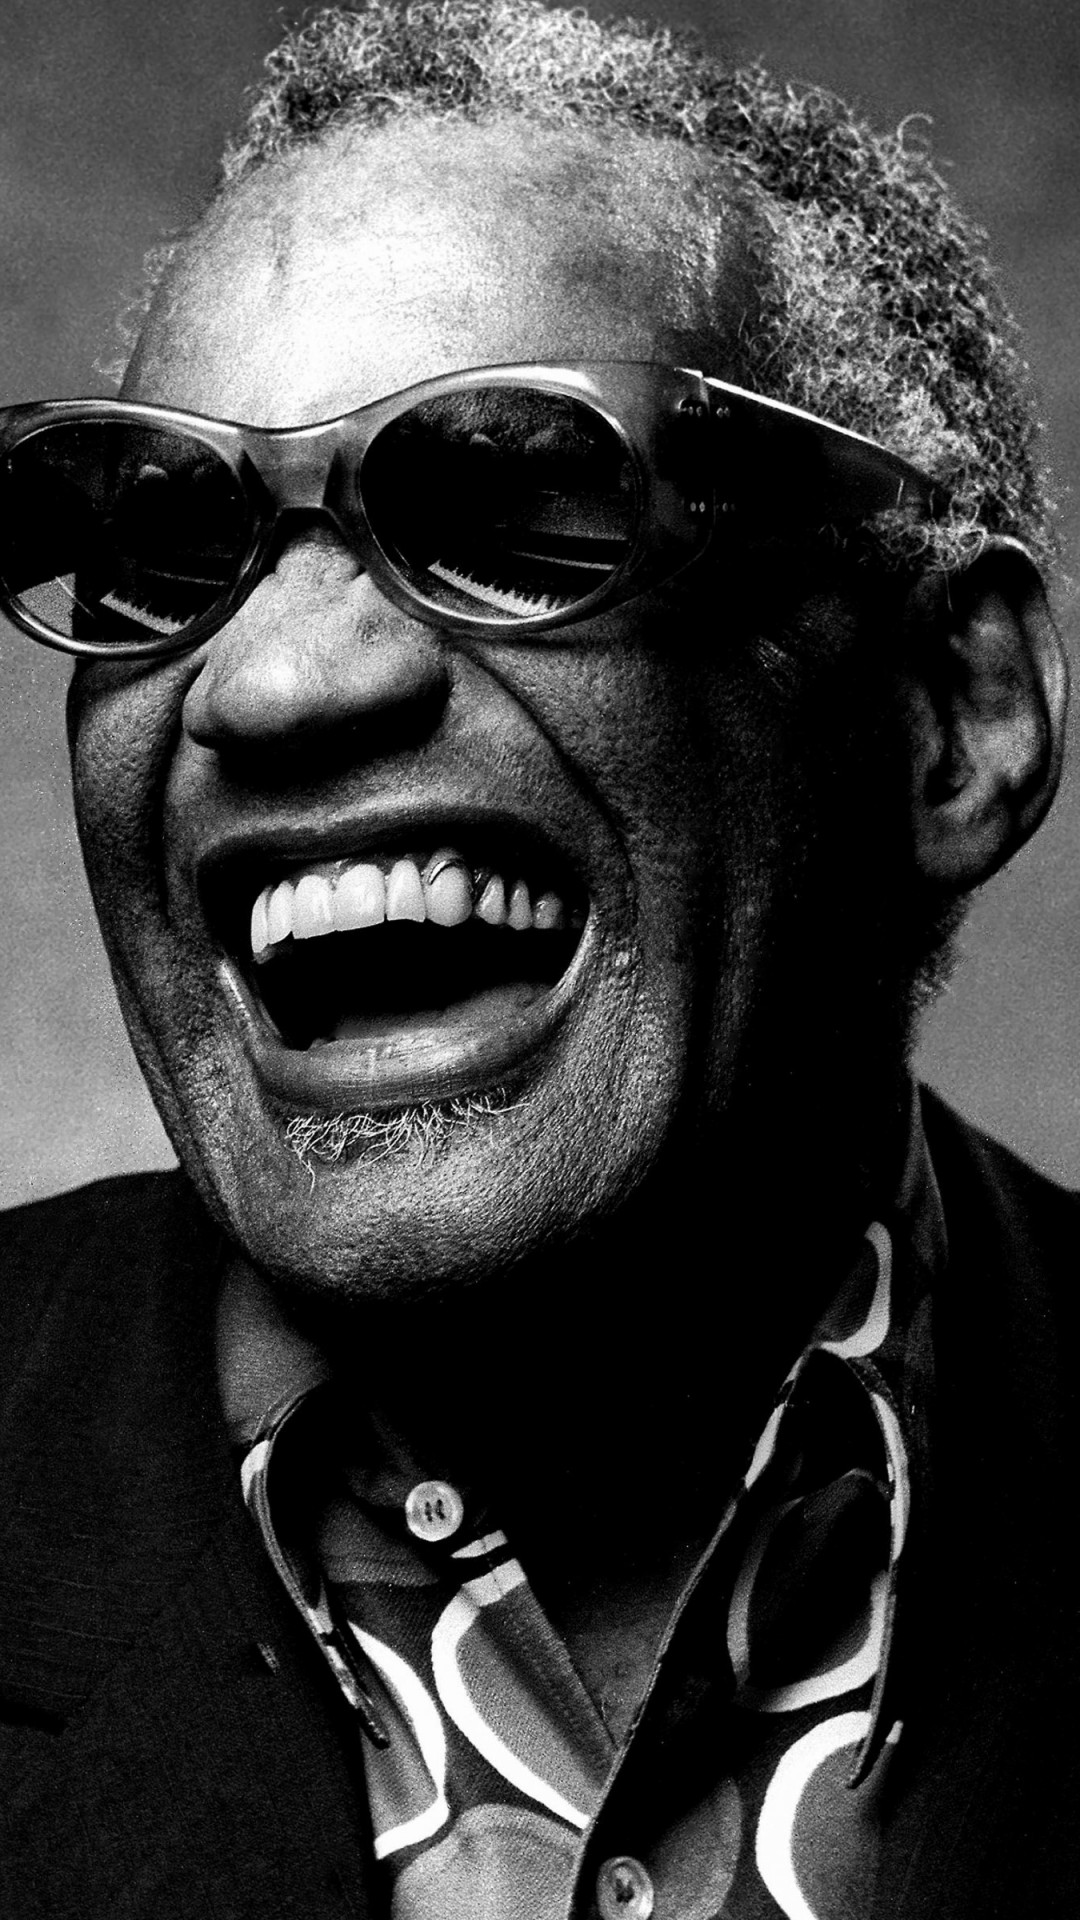 Ray Charles Portrait in Black & White Wallpaper for SONY Xperia Z2